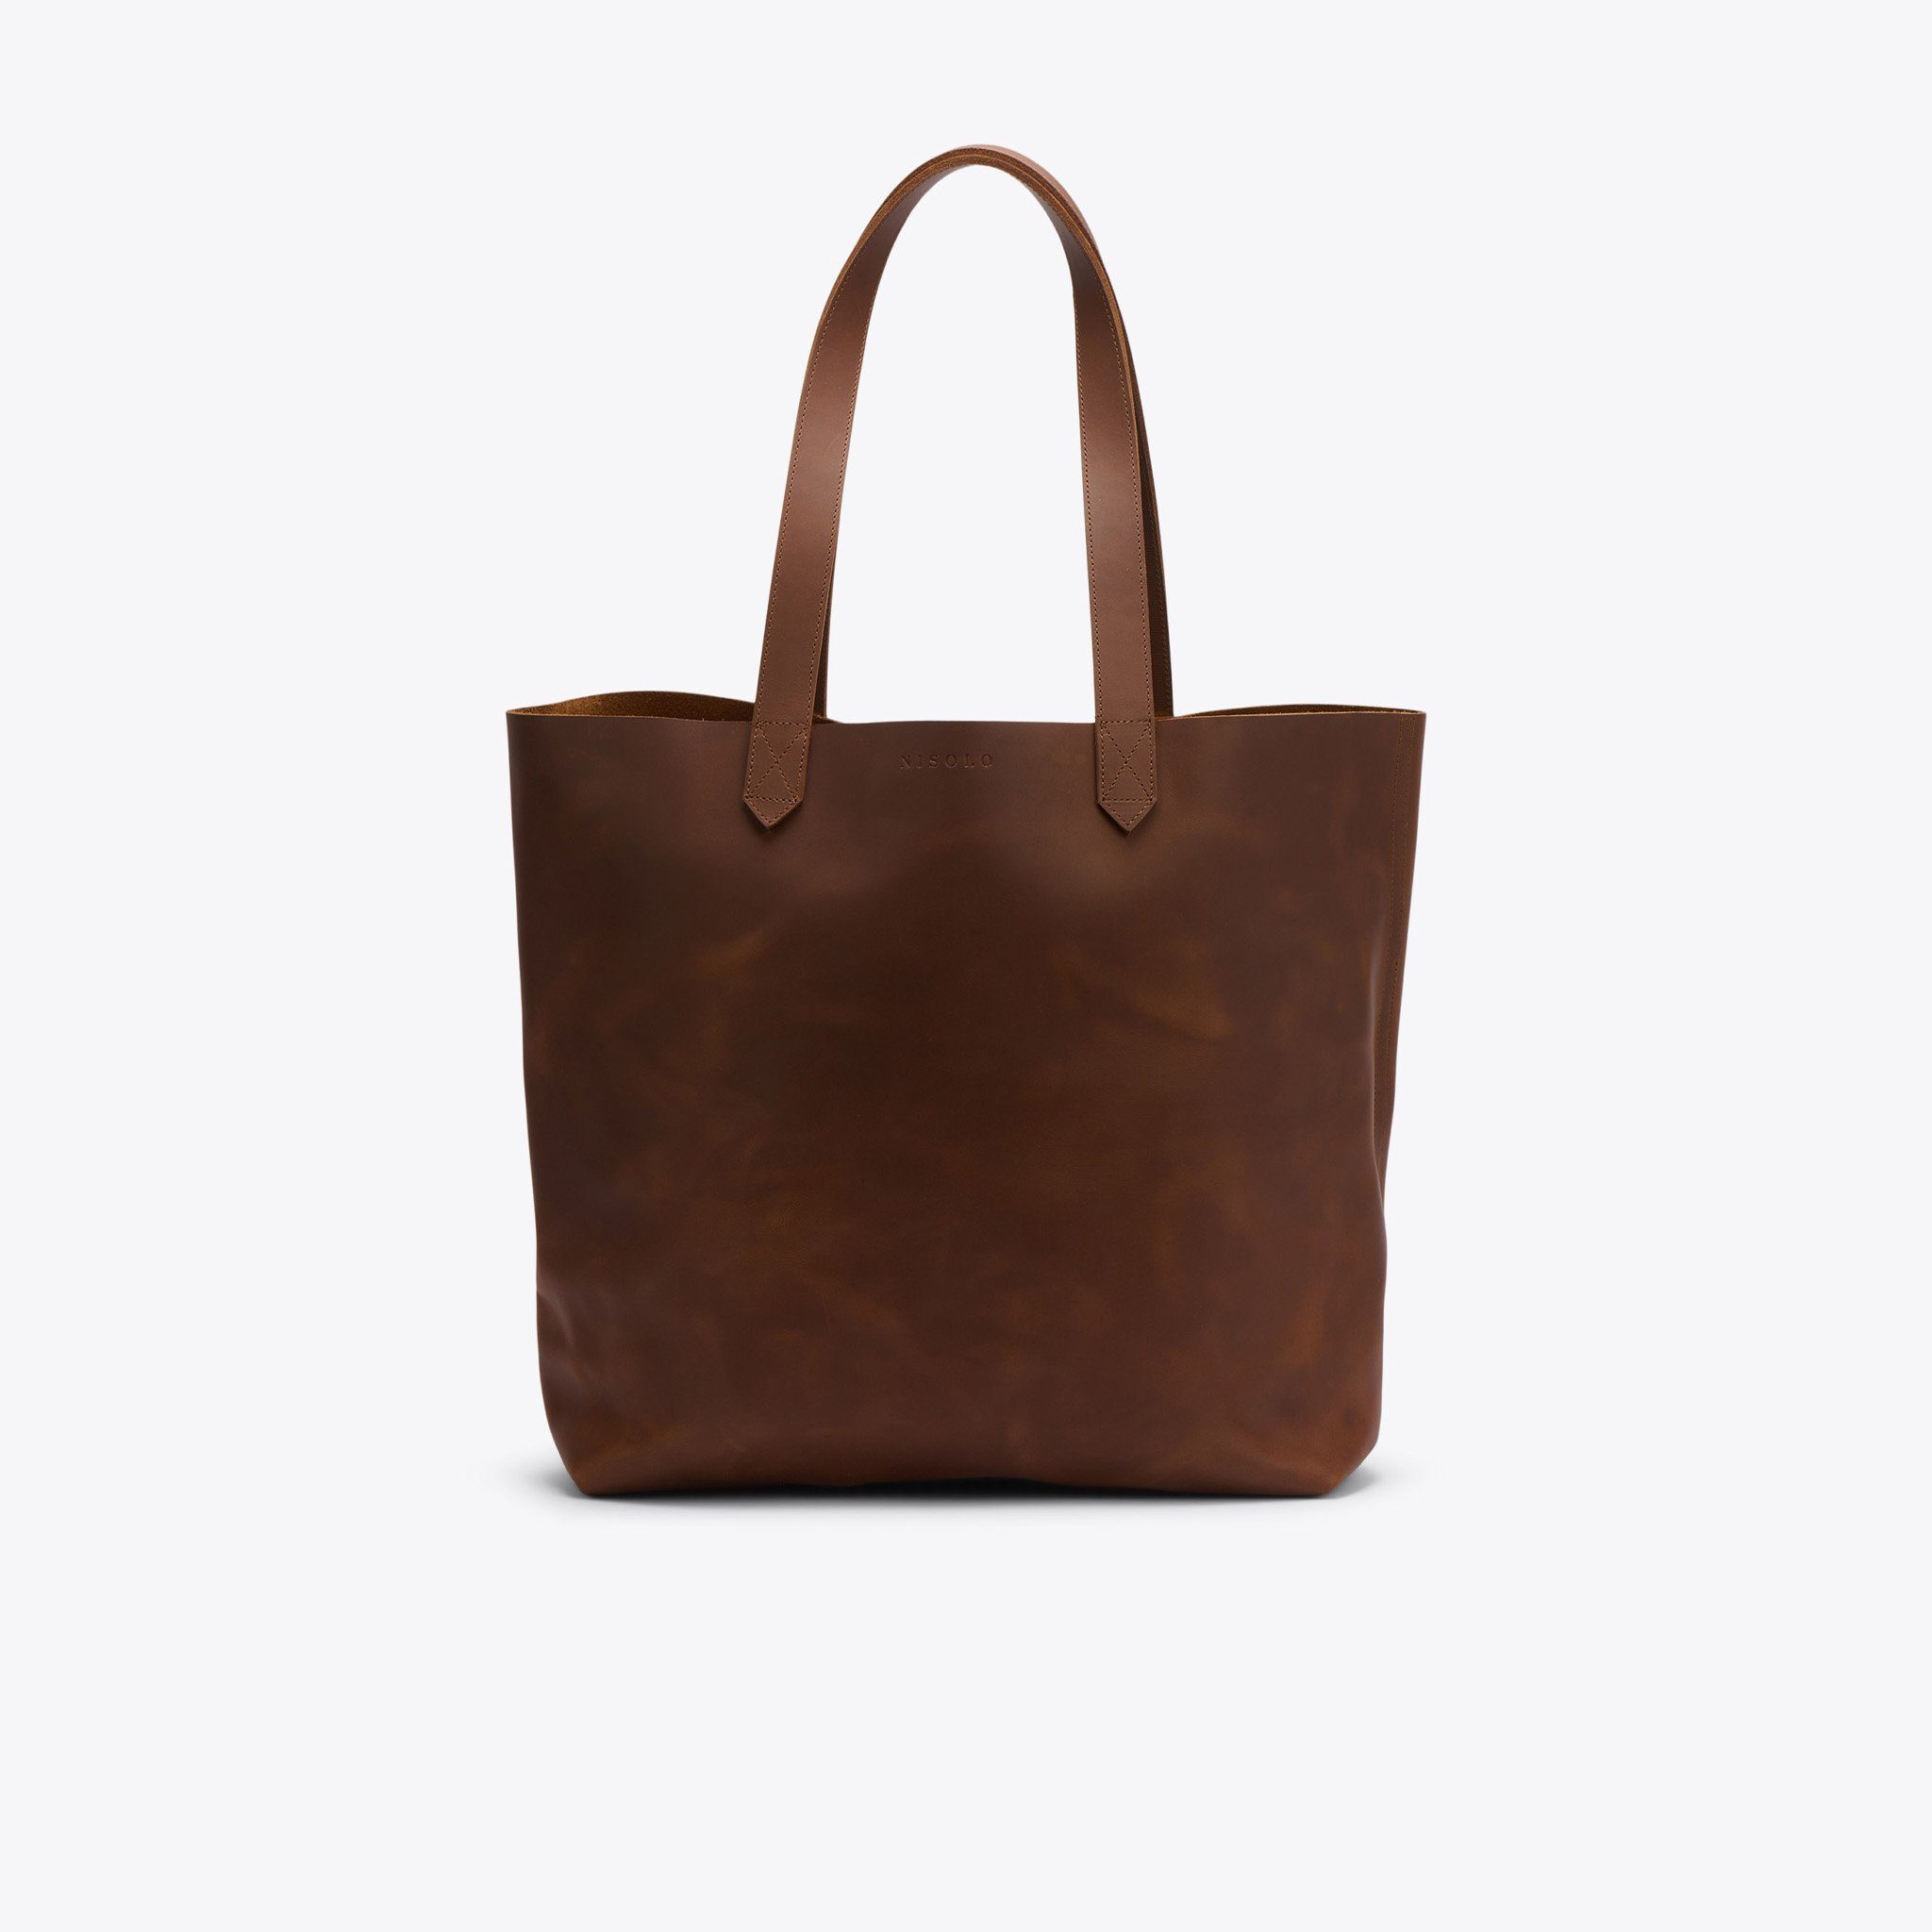 Product Image 2 of the Lori Tote WP Brown Nisolo 